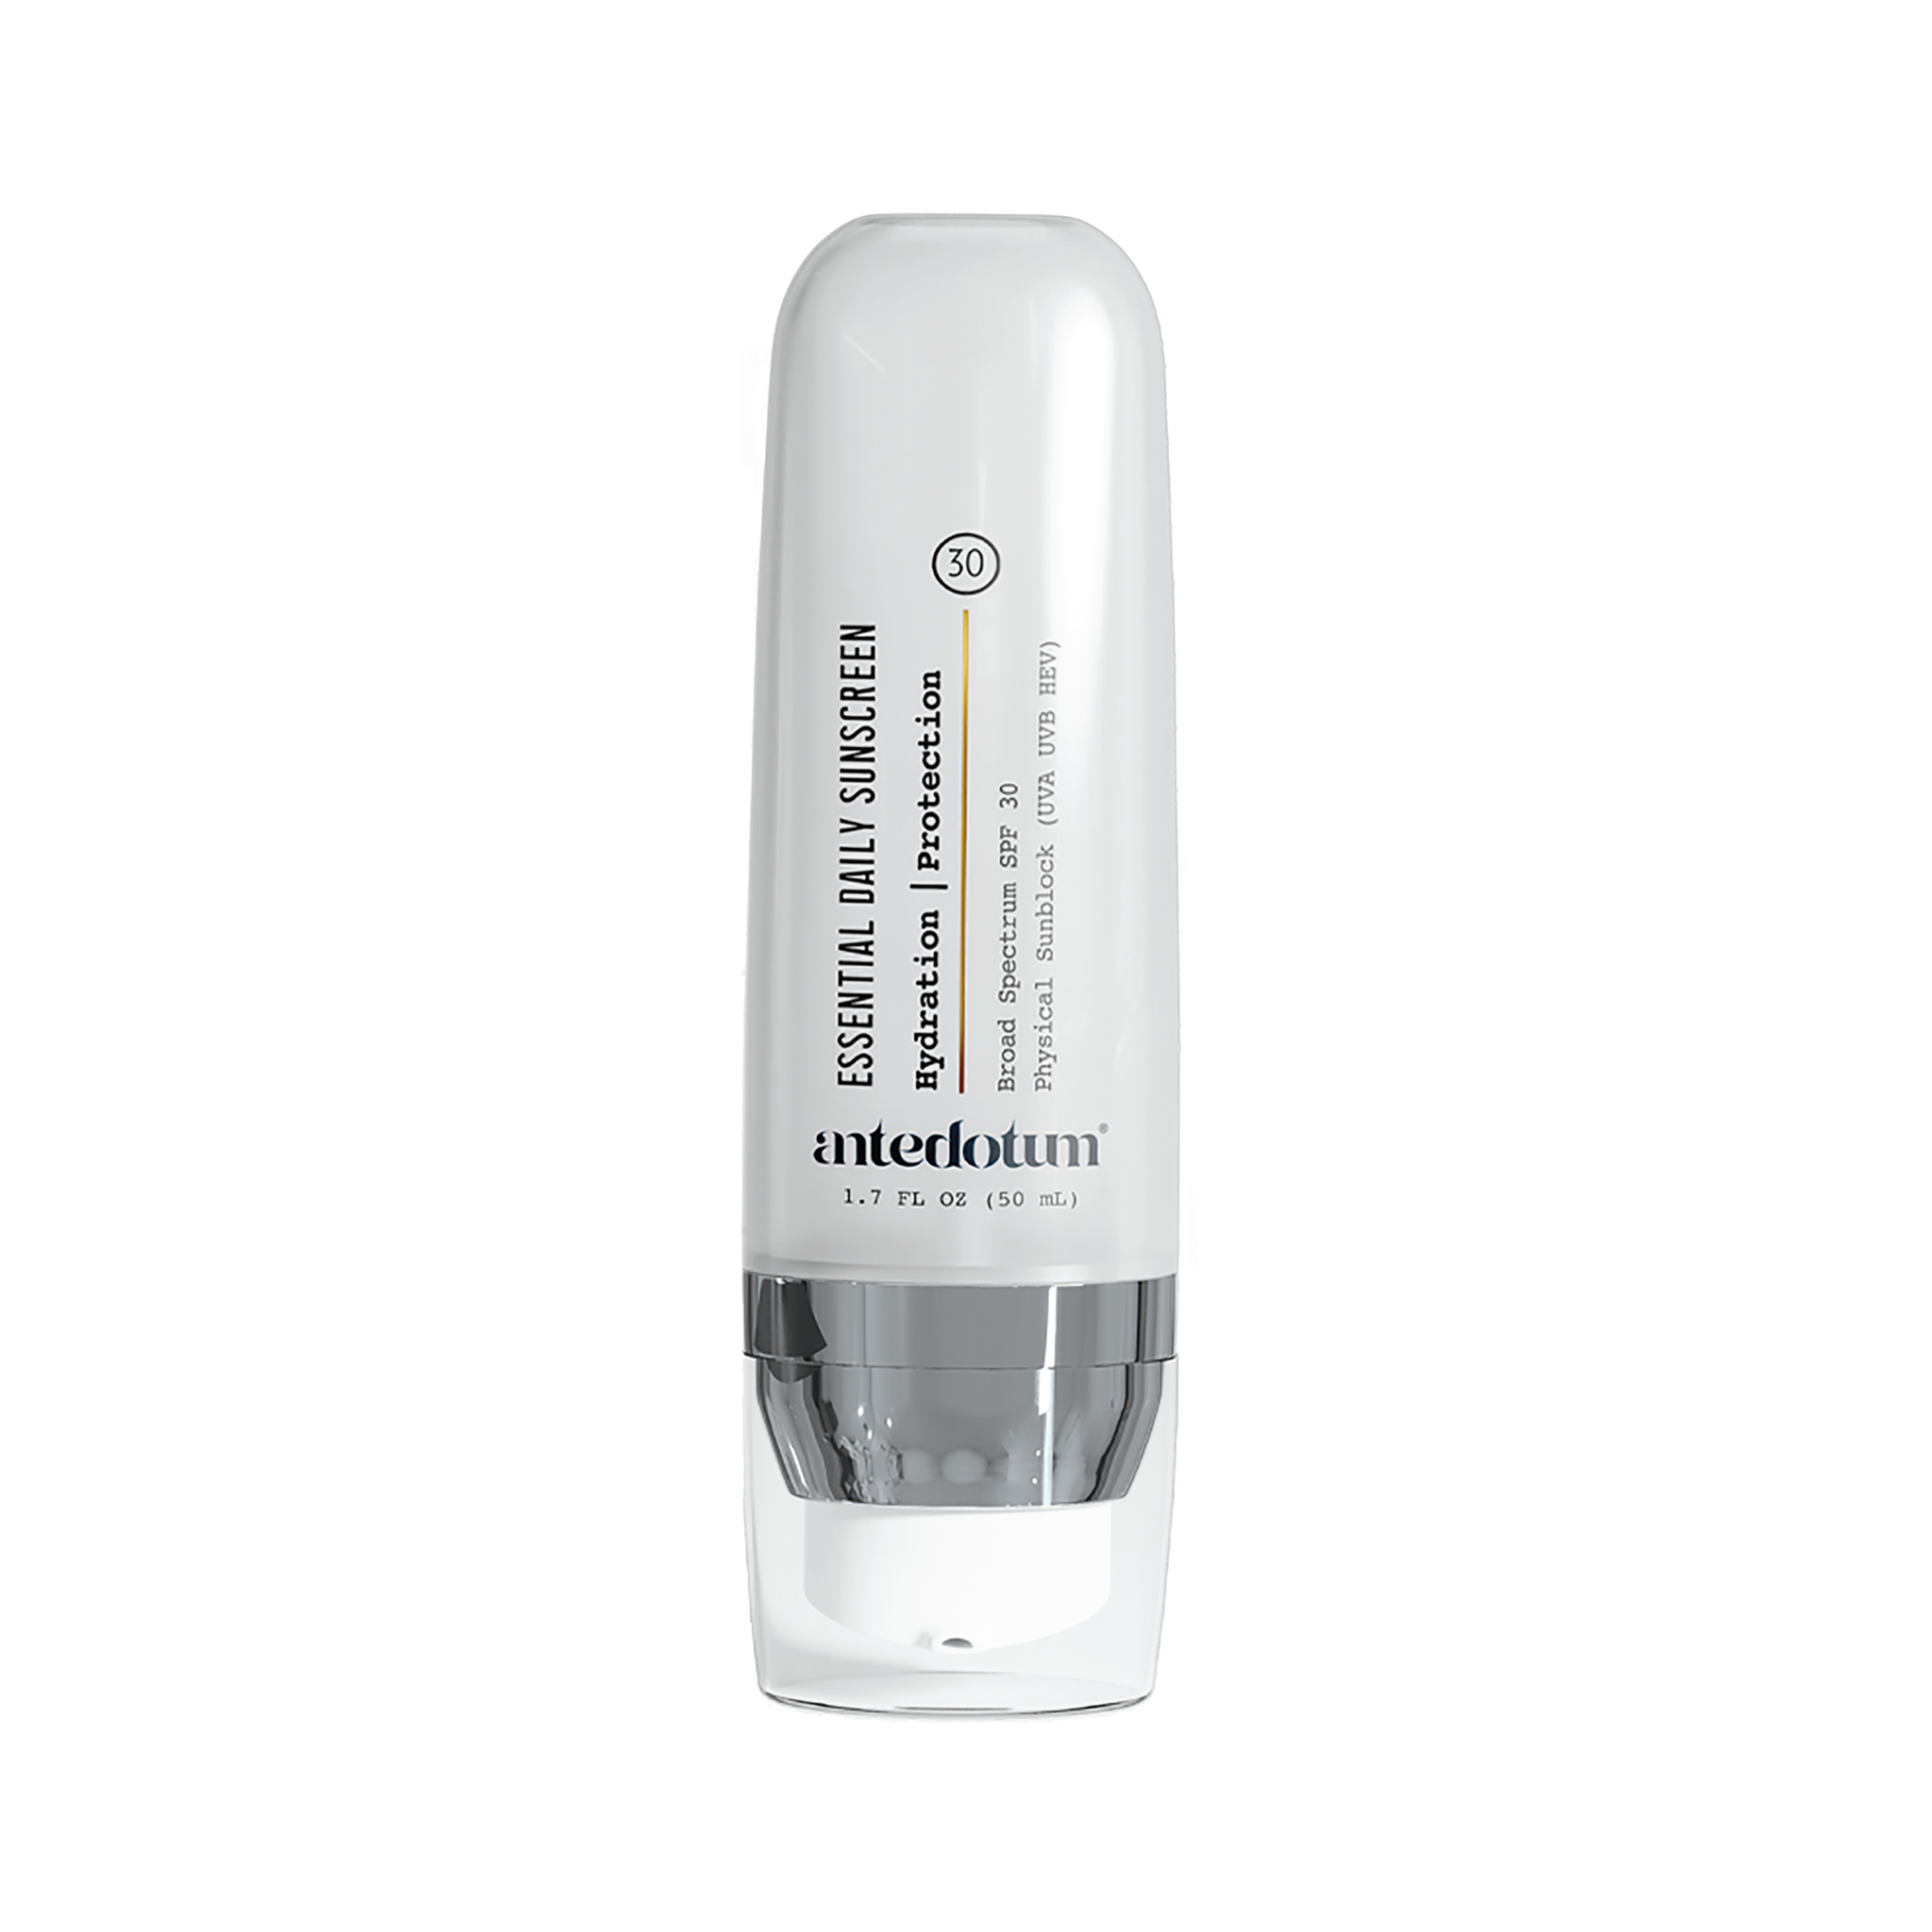 Essential Daily Sunscreen by Antedotum